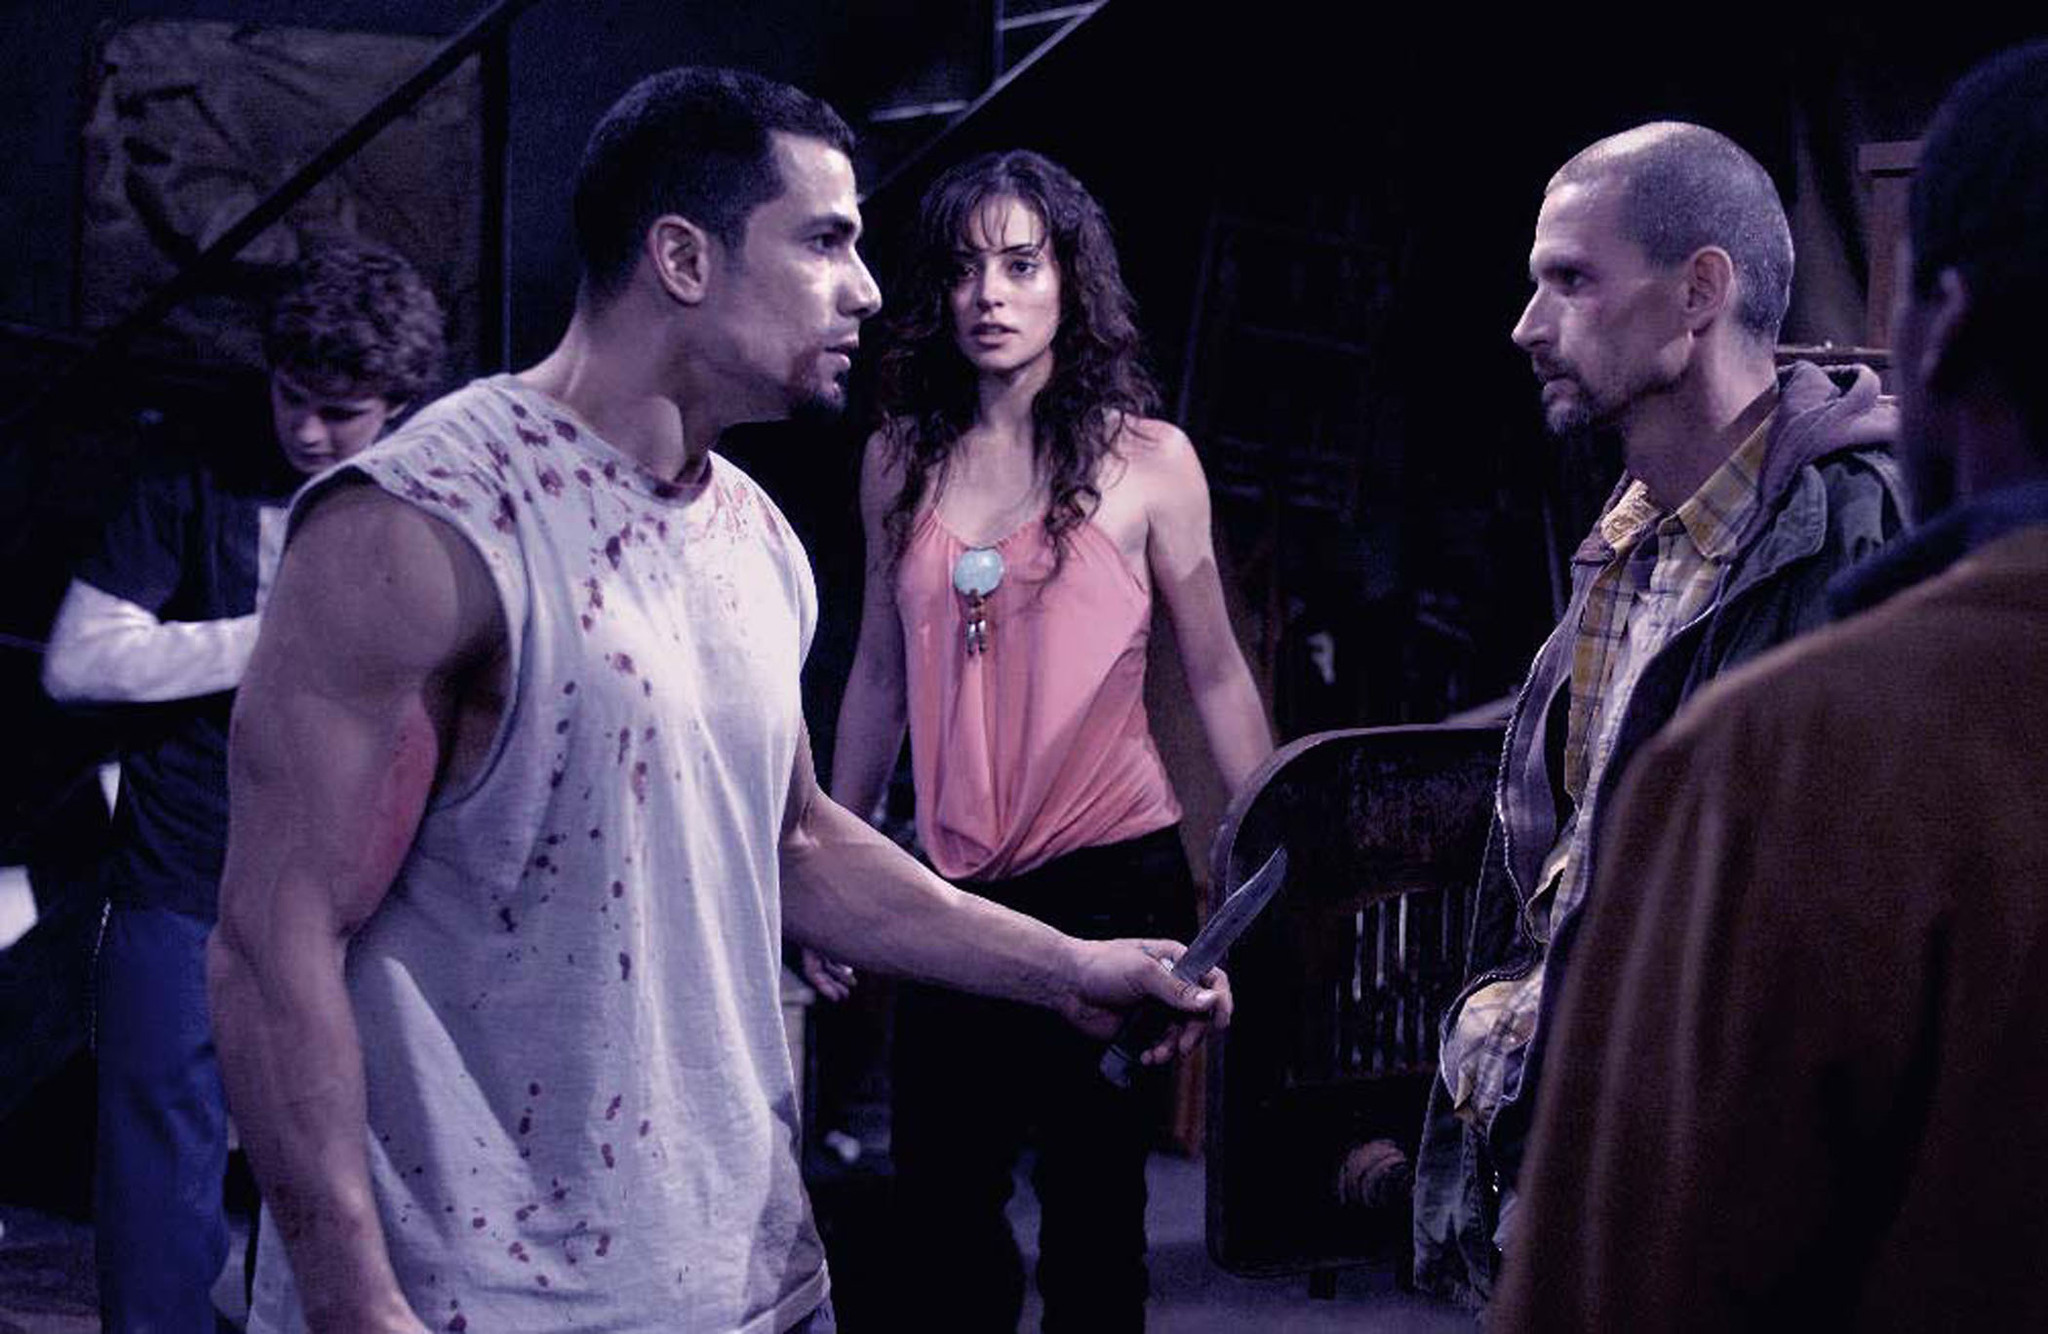 Still of Wil Burd, Emmanuelle Vaugier and Franky G in Saw II (2005)